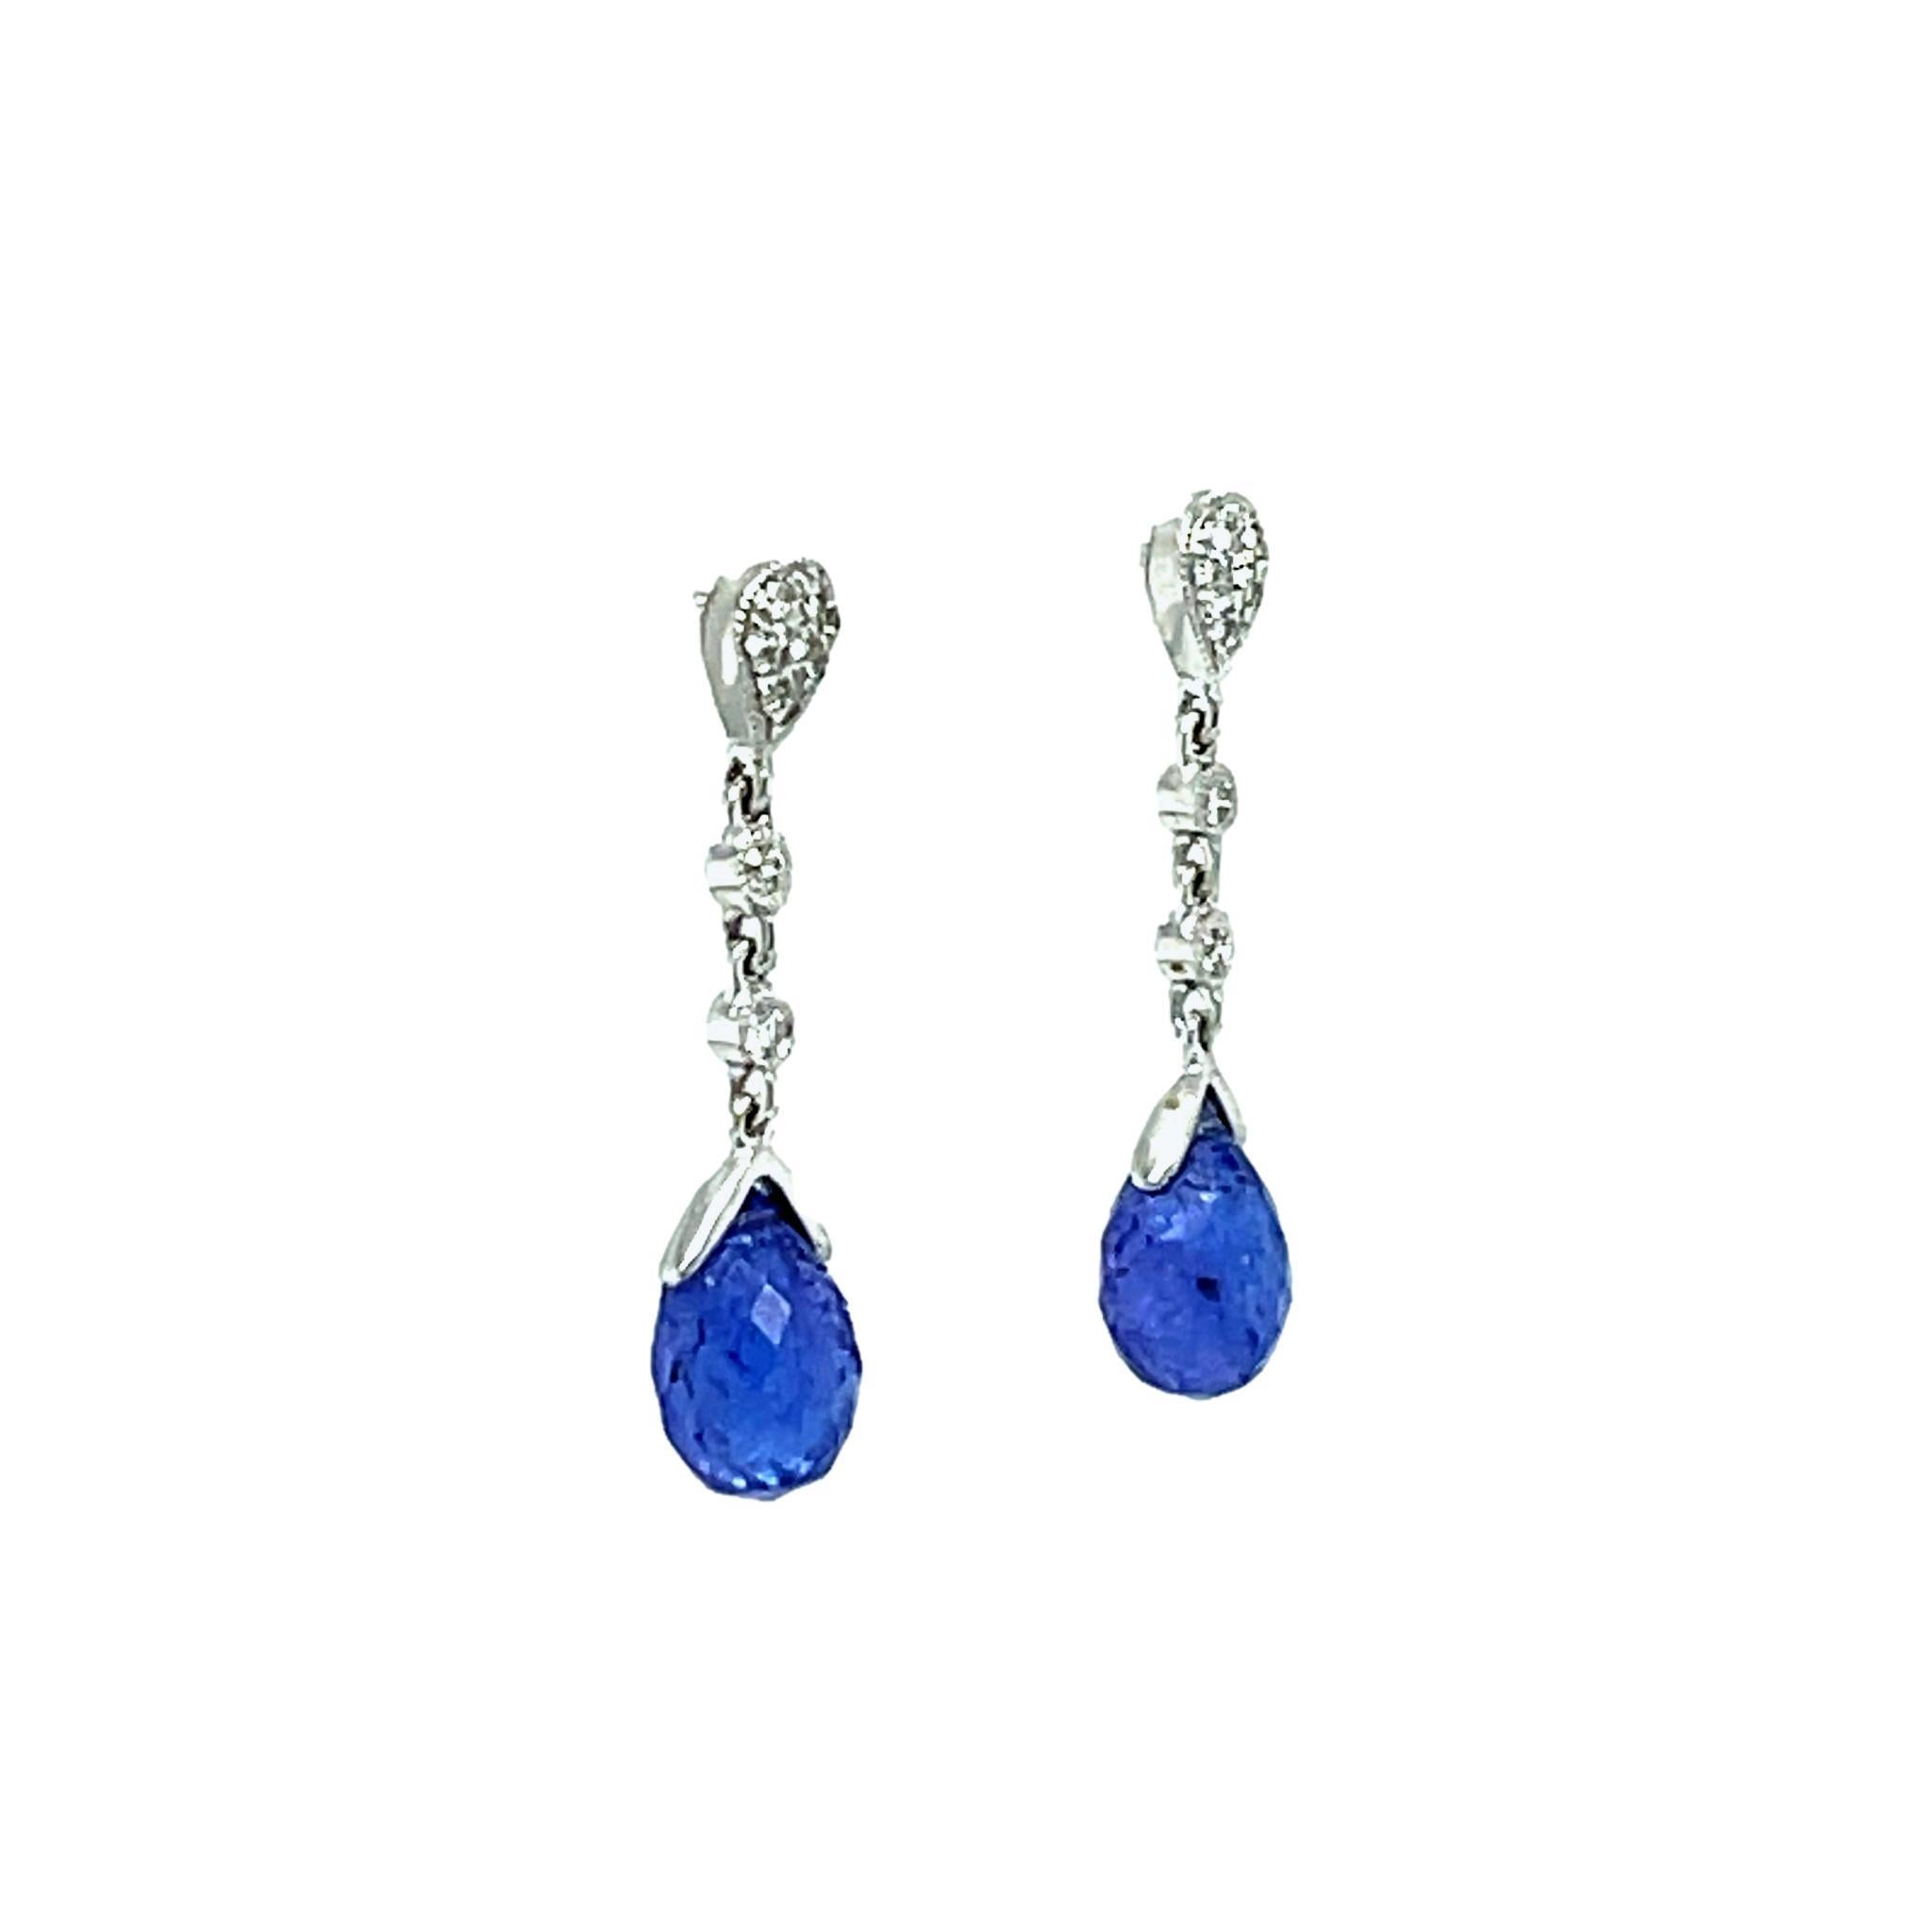 These gorgeous deep blue Briolette Tanzanite dangling earrings are beautiful to wear to any event. They are set in 18 karat white gold and have brilliant cut round diamonds. They have double push back closure for extra security. These earrings come